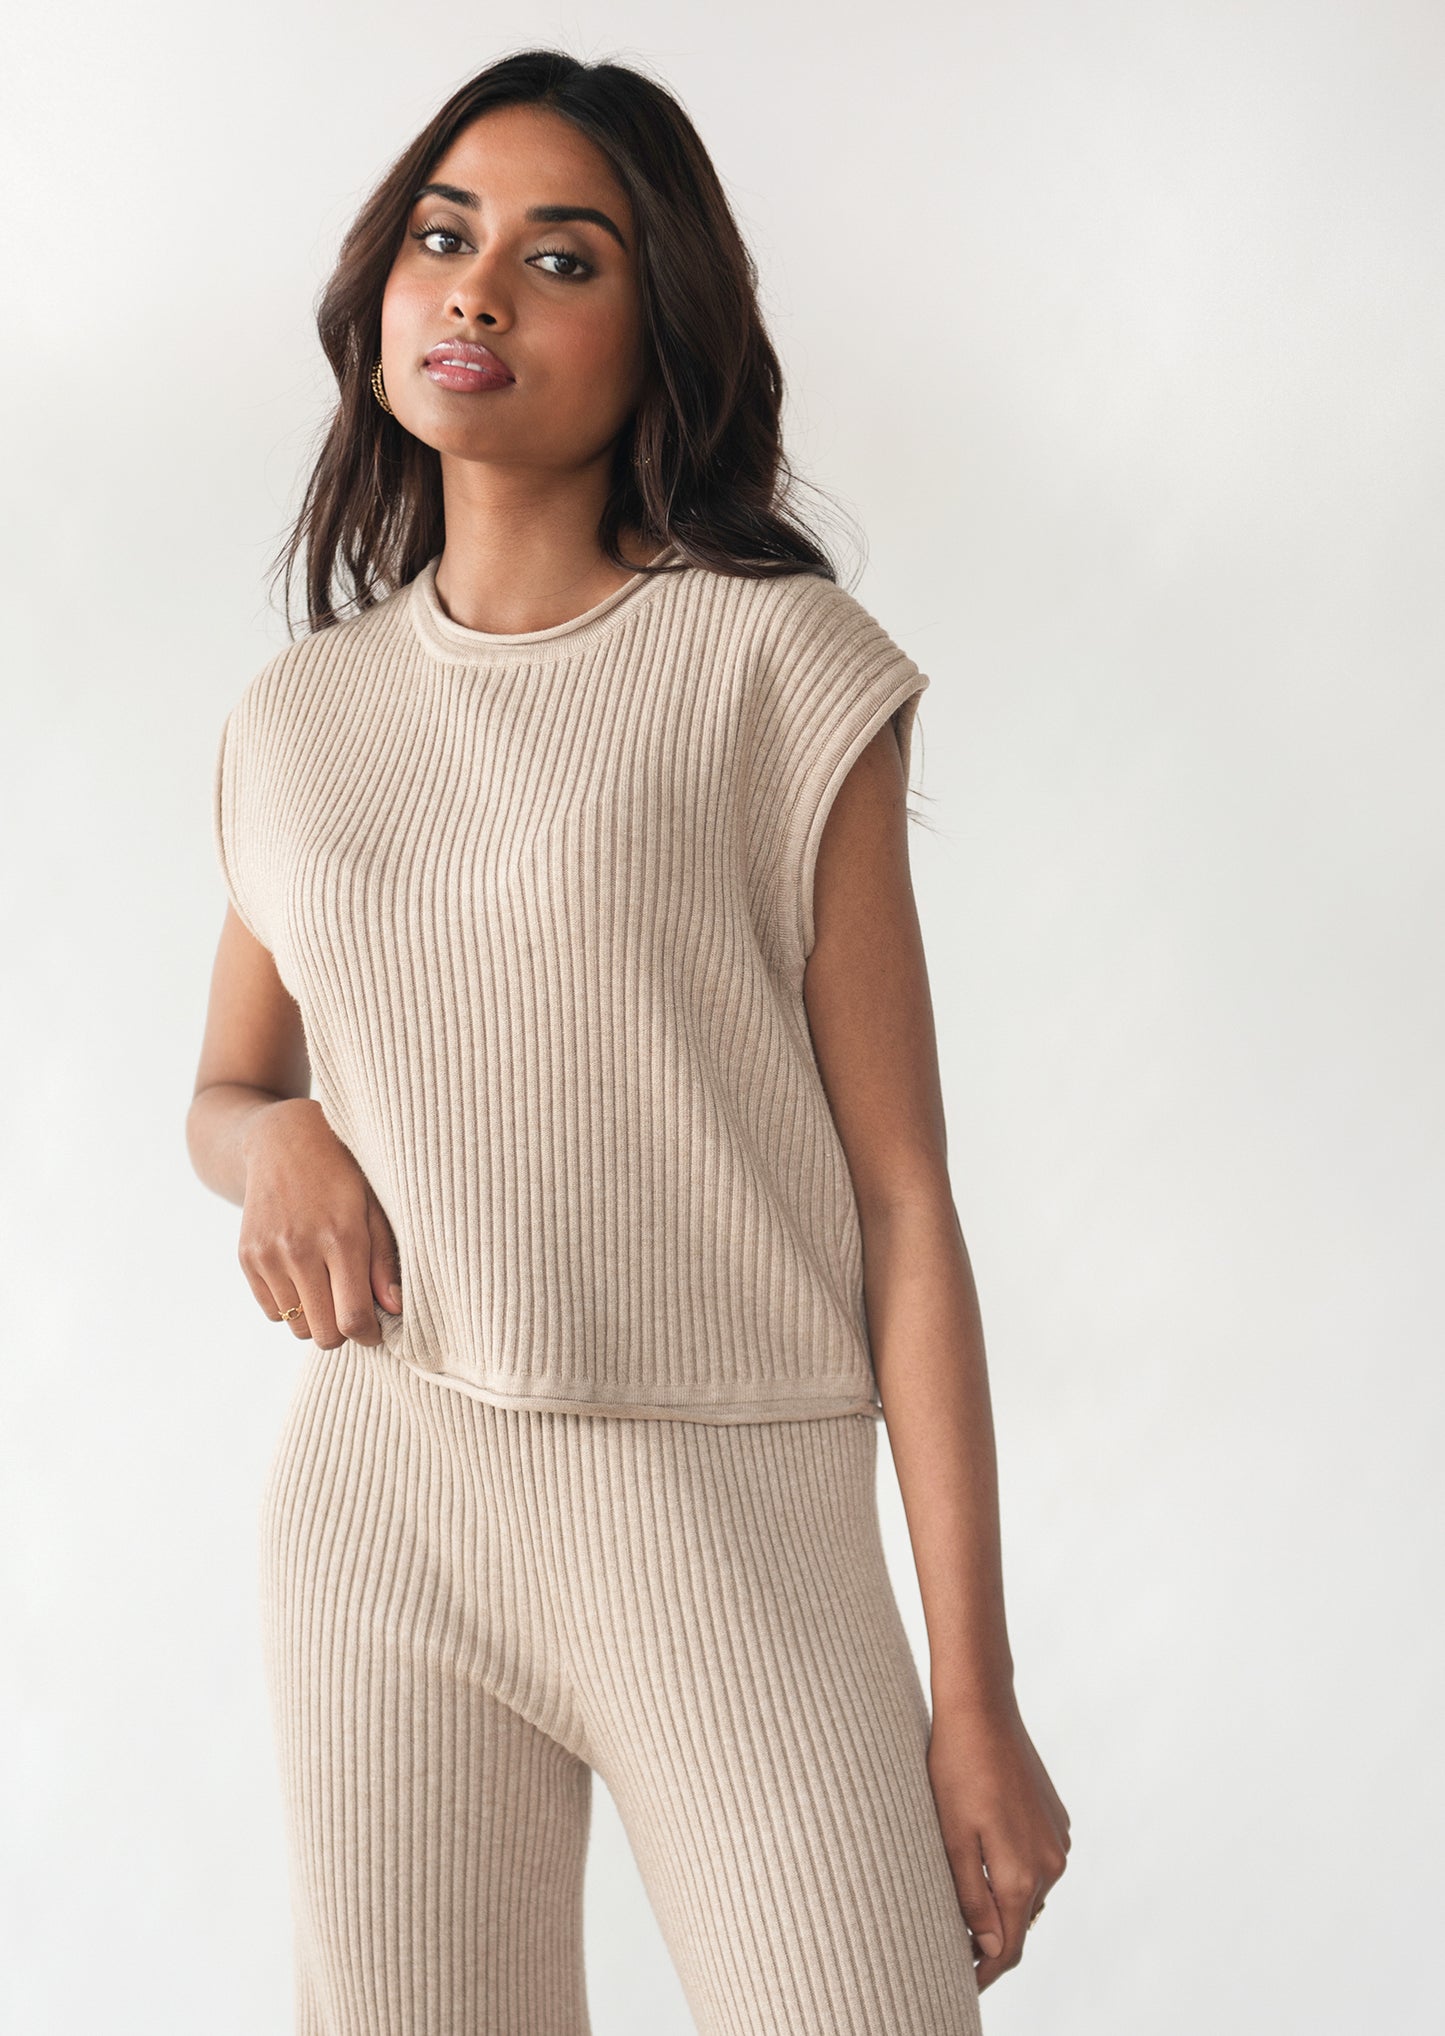 Ribbed knit top in taupe